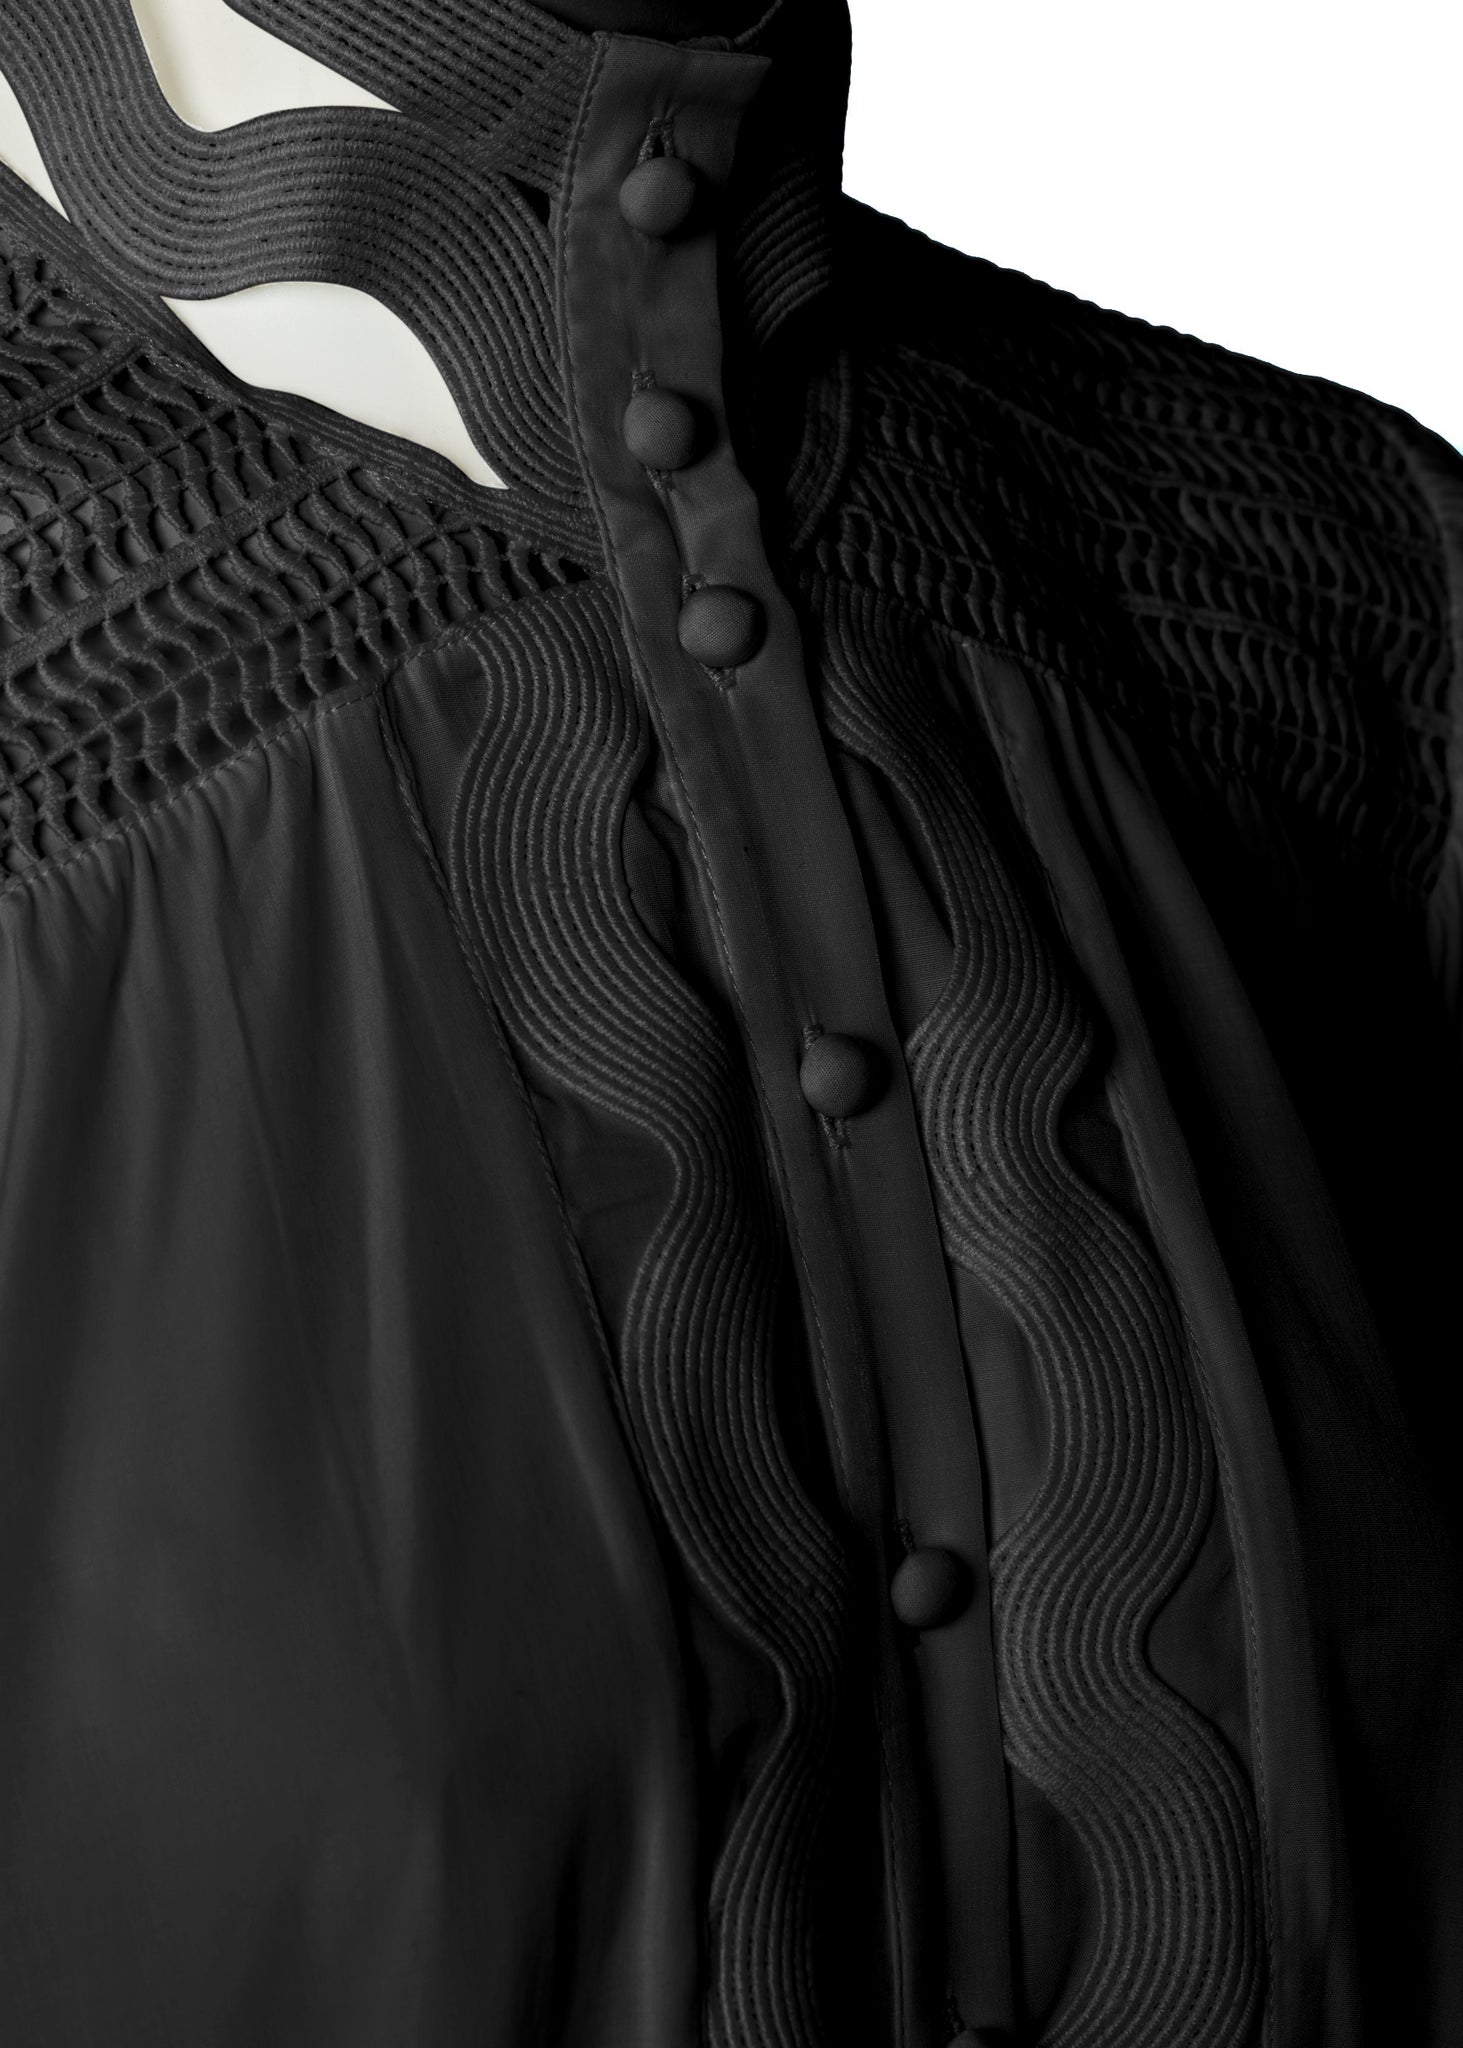 button detail on womens black shirt with lace detail to the collar shoulders and arm cuffs and balloon sleeve